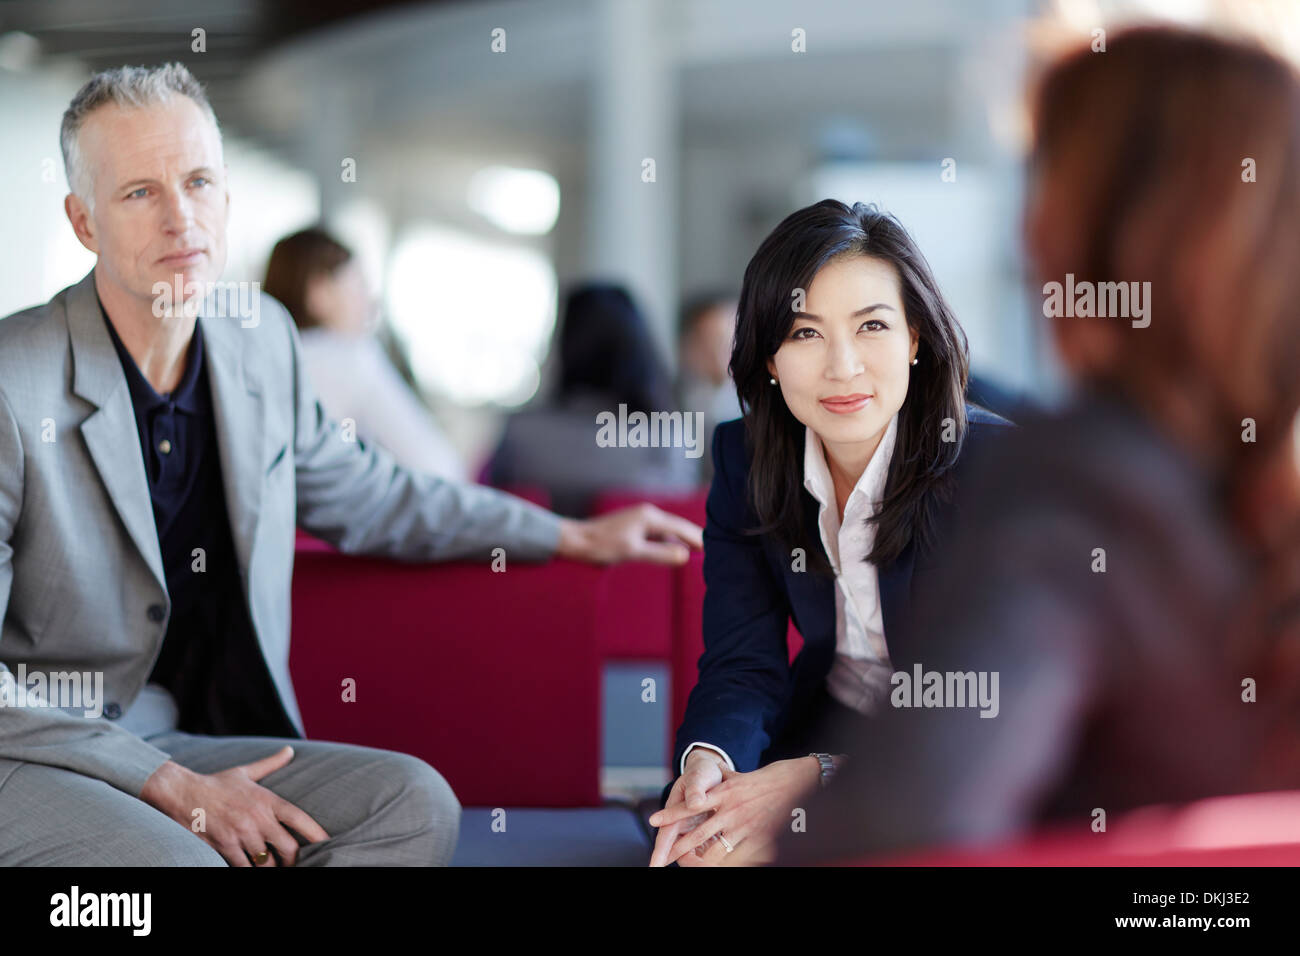 Business people talking in office lobby Stock Photo